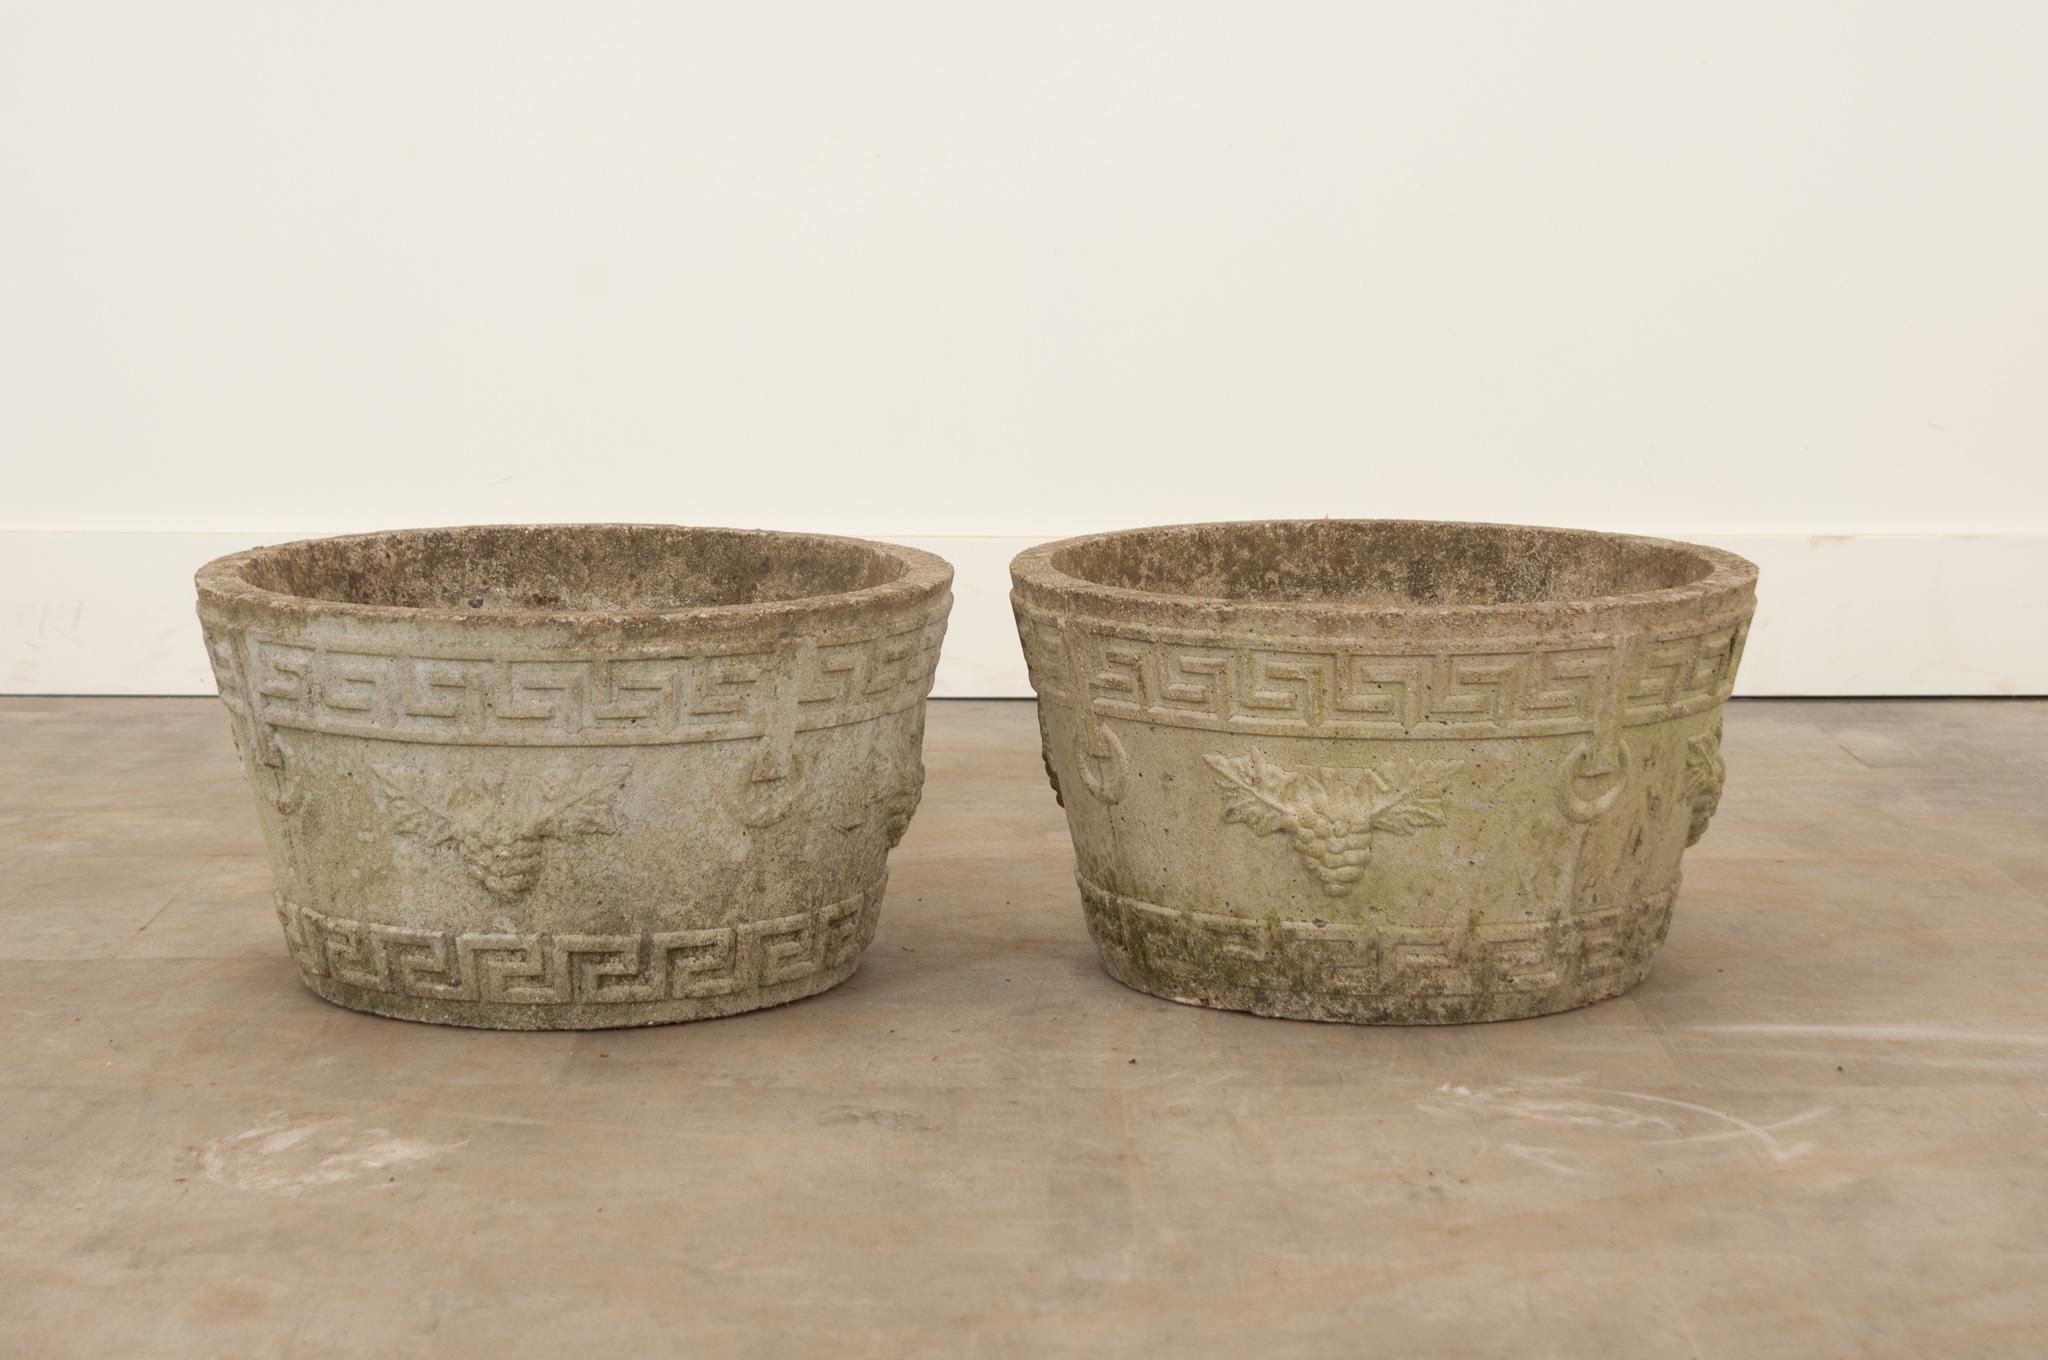 Drawing on classically inspired motifs, this pair of planters showcase Greek key borders and grape vine designs. Years of outdoor exposure have given them a fascinating patina. The bottoms feature holes for water drainage. Make sure to view the